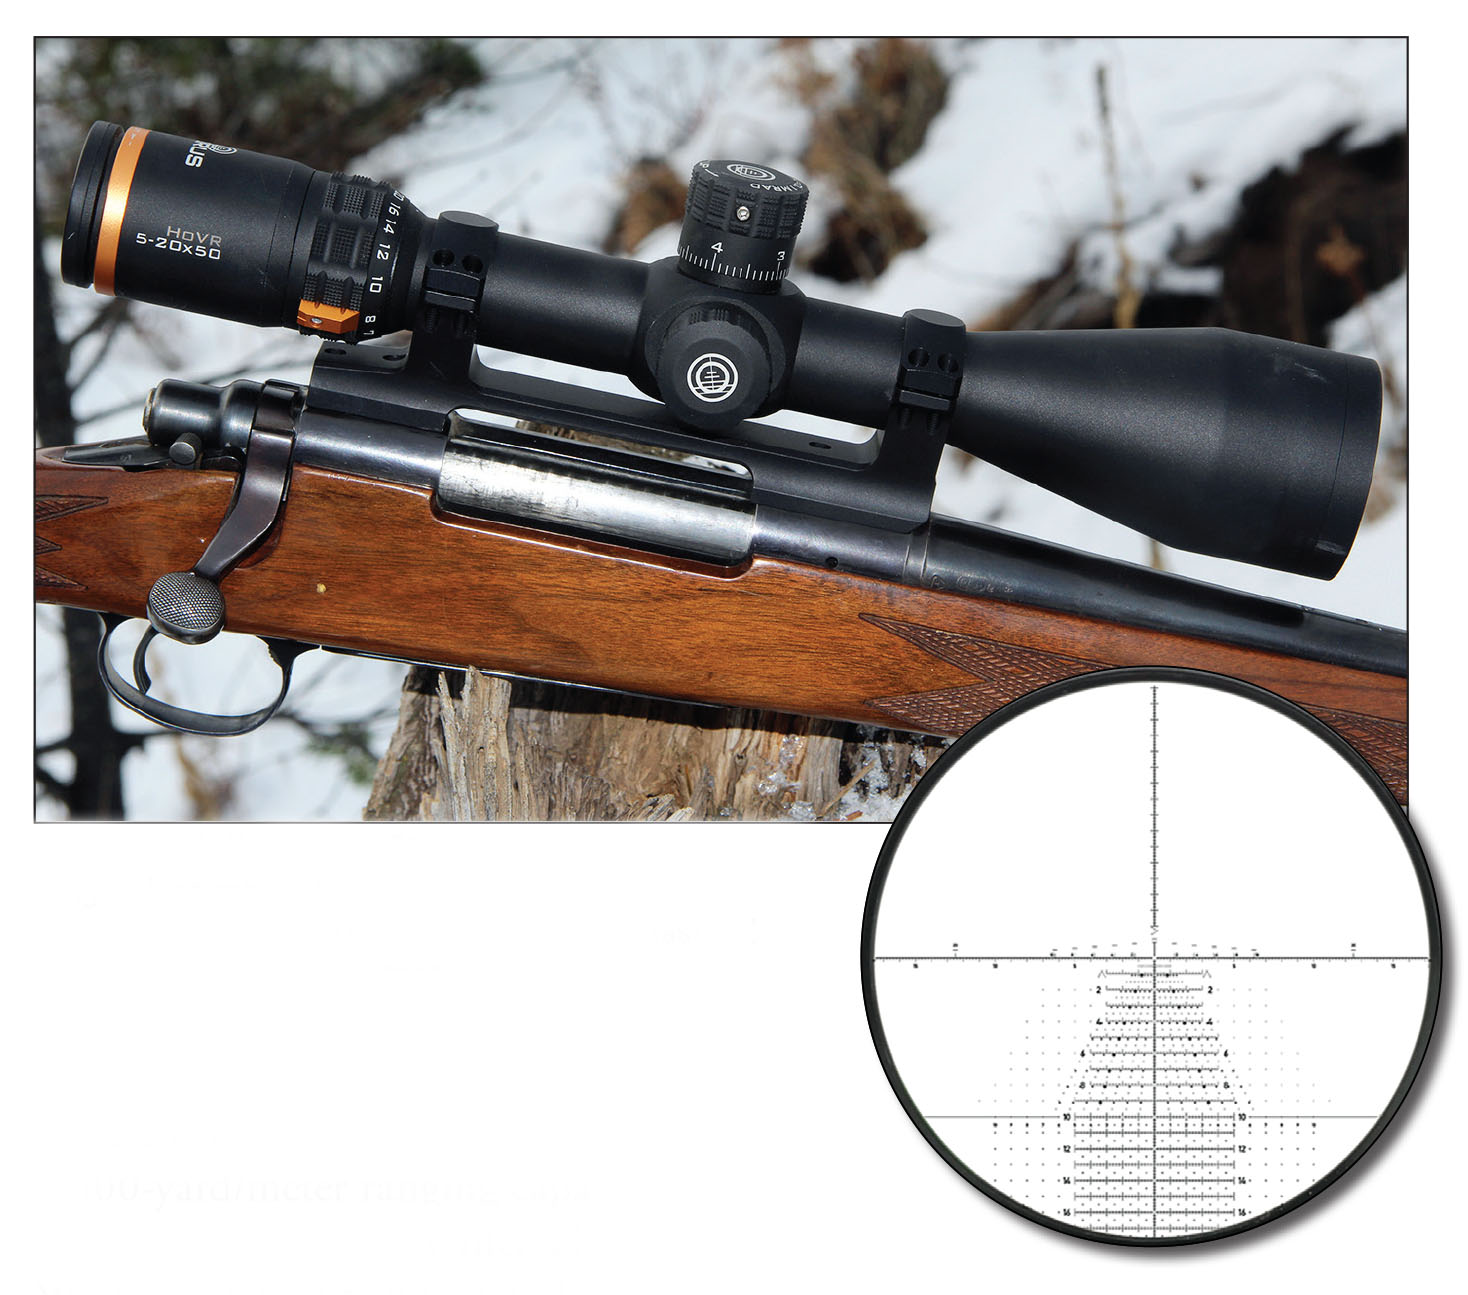 Horus Vision’s HoVR 5-20x 50mm makes a perfect optic for banging long-range steel or hunting. Its turret system and Horus TREMOR3 U.S. SOCOM reticle allows for fast and precise corrections at any range.